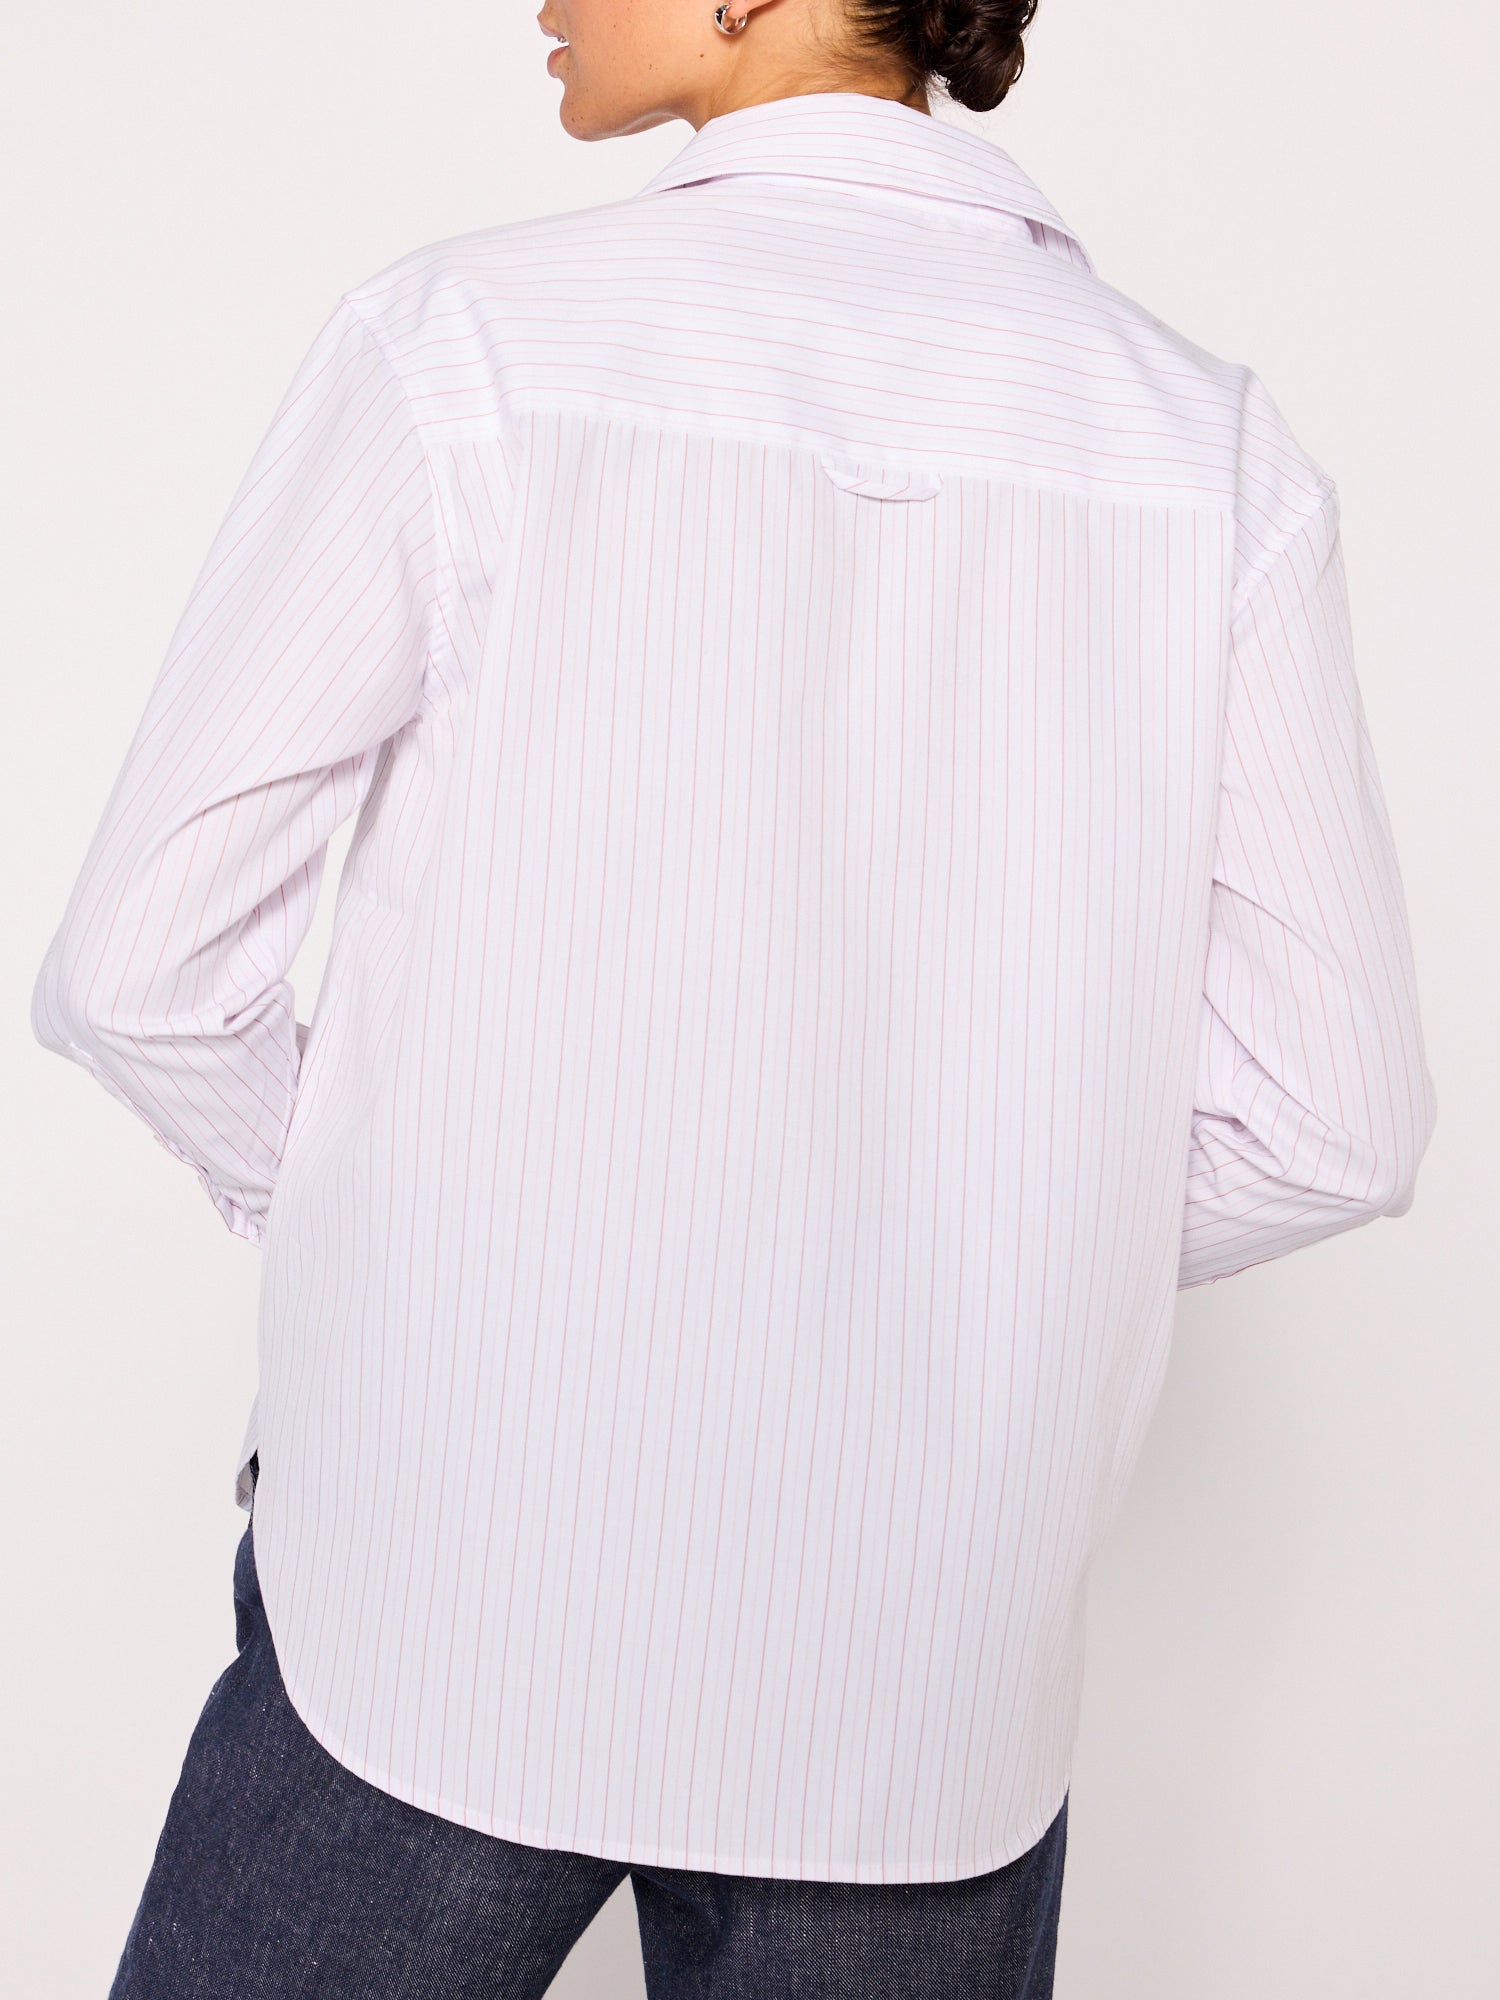 Everyday button up pink stripe shirt back view